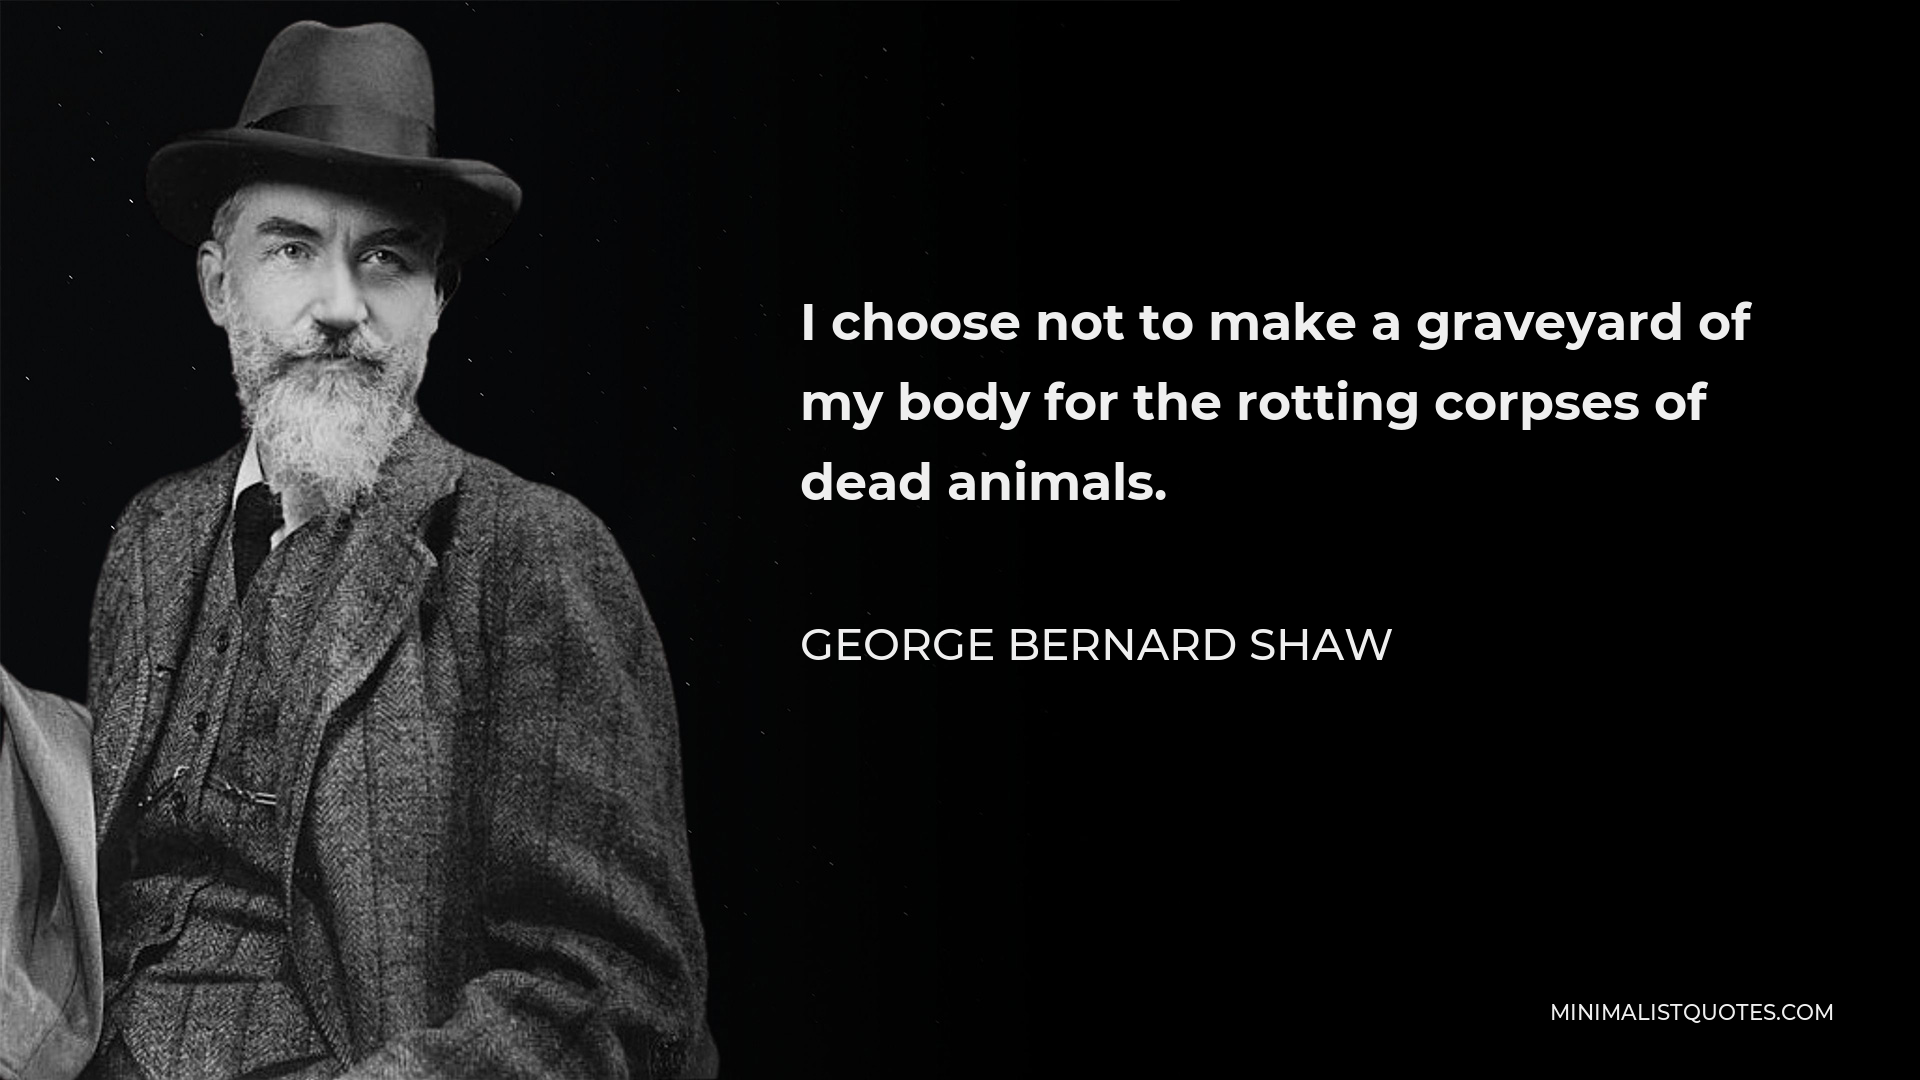 George Bernard Shaw Quote - I choose not to make a graveyard of my body for the rotting corpses of dead animals.